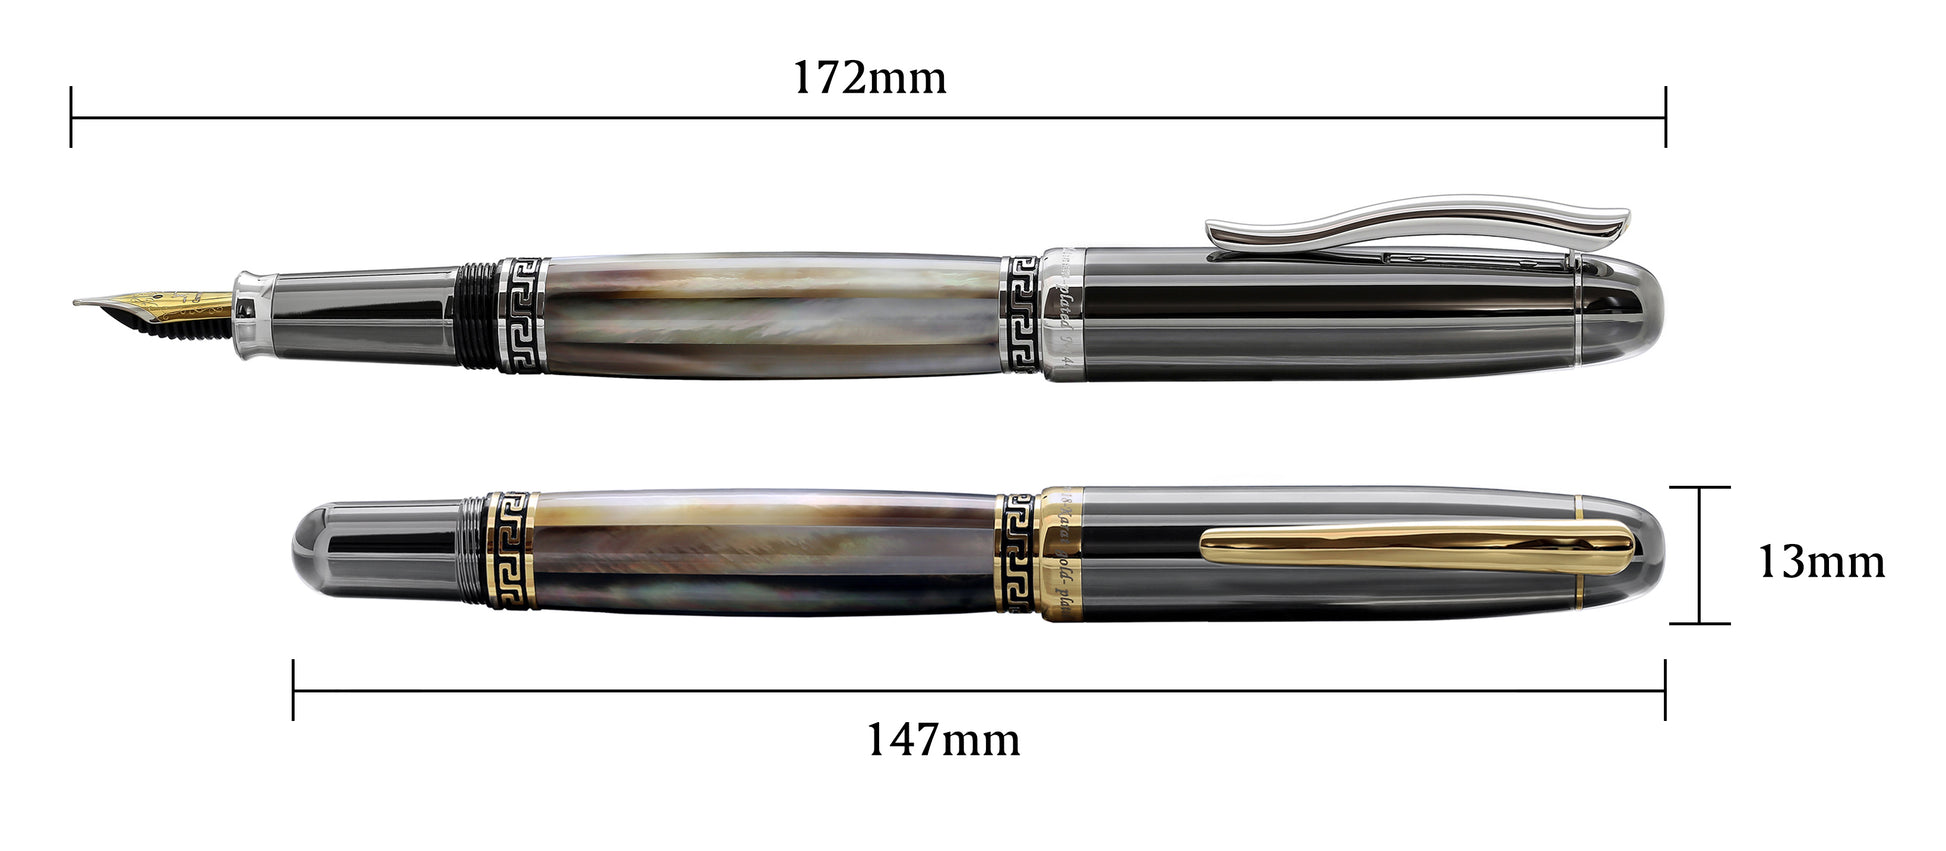 Xezo - Comparison between capped and uncapped Maestro Black MOP Tungsten fountain pens. The uncapped Maestro Black MOP Tungsten measures 172mm in length and the capped Maestro Black MOP Tungsten measures 147mm in length and 13mm in width.